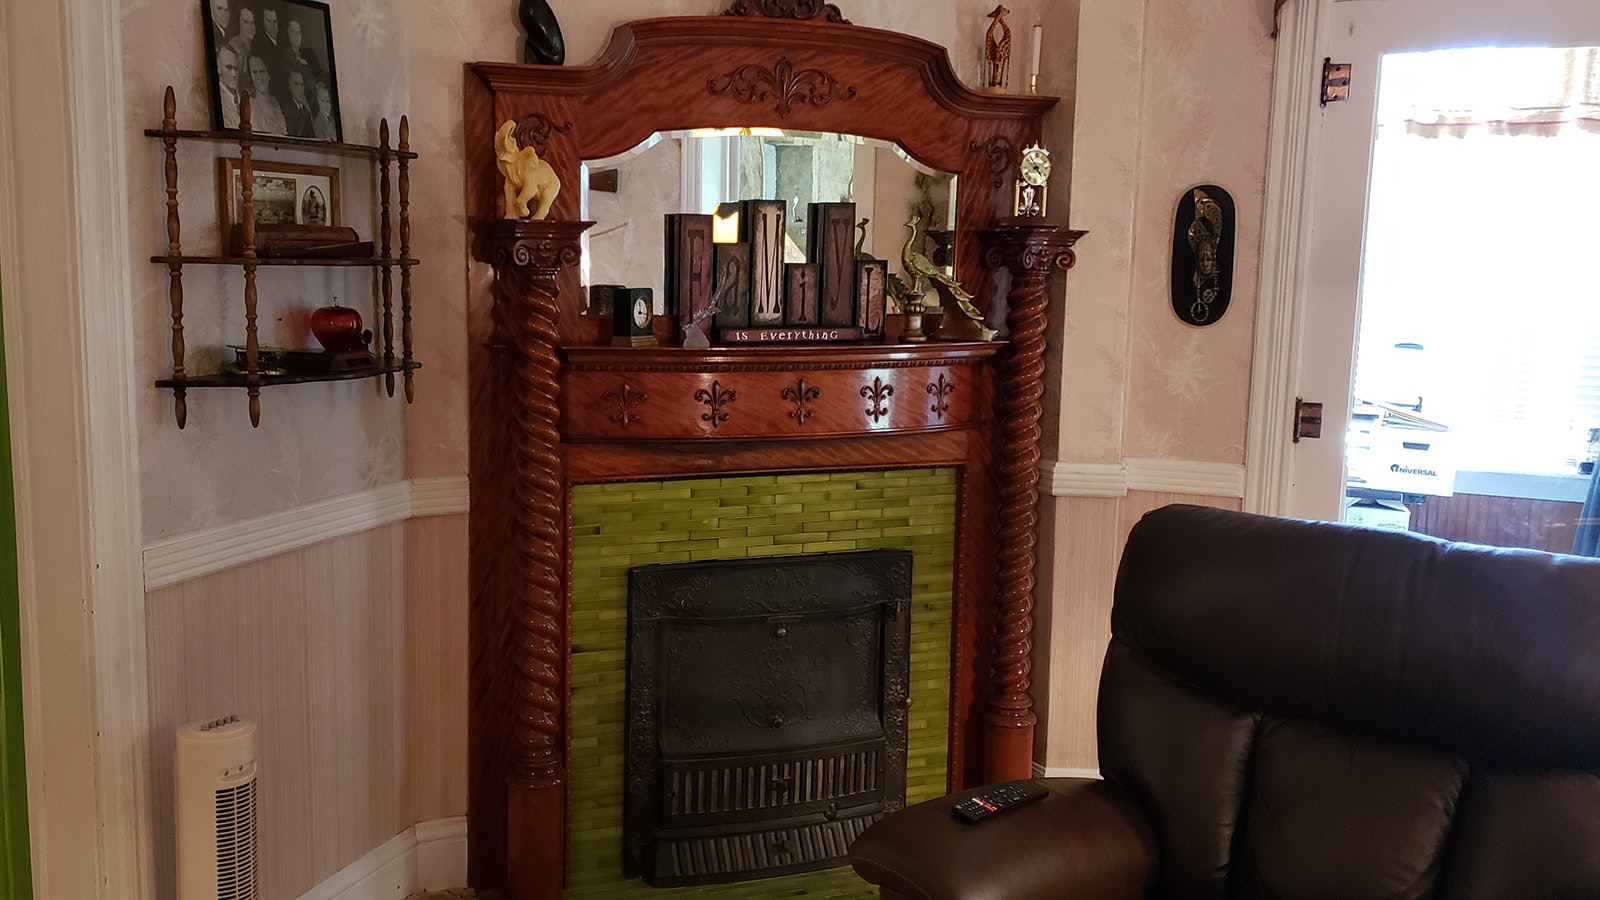 One of the ornate fireplaces at the J.B. Okie Mansion.